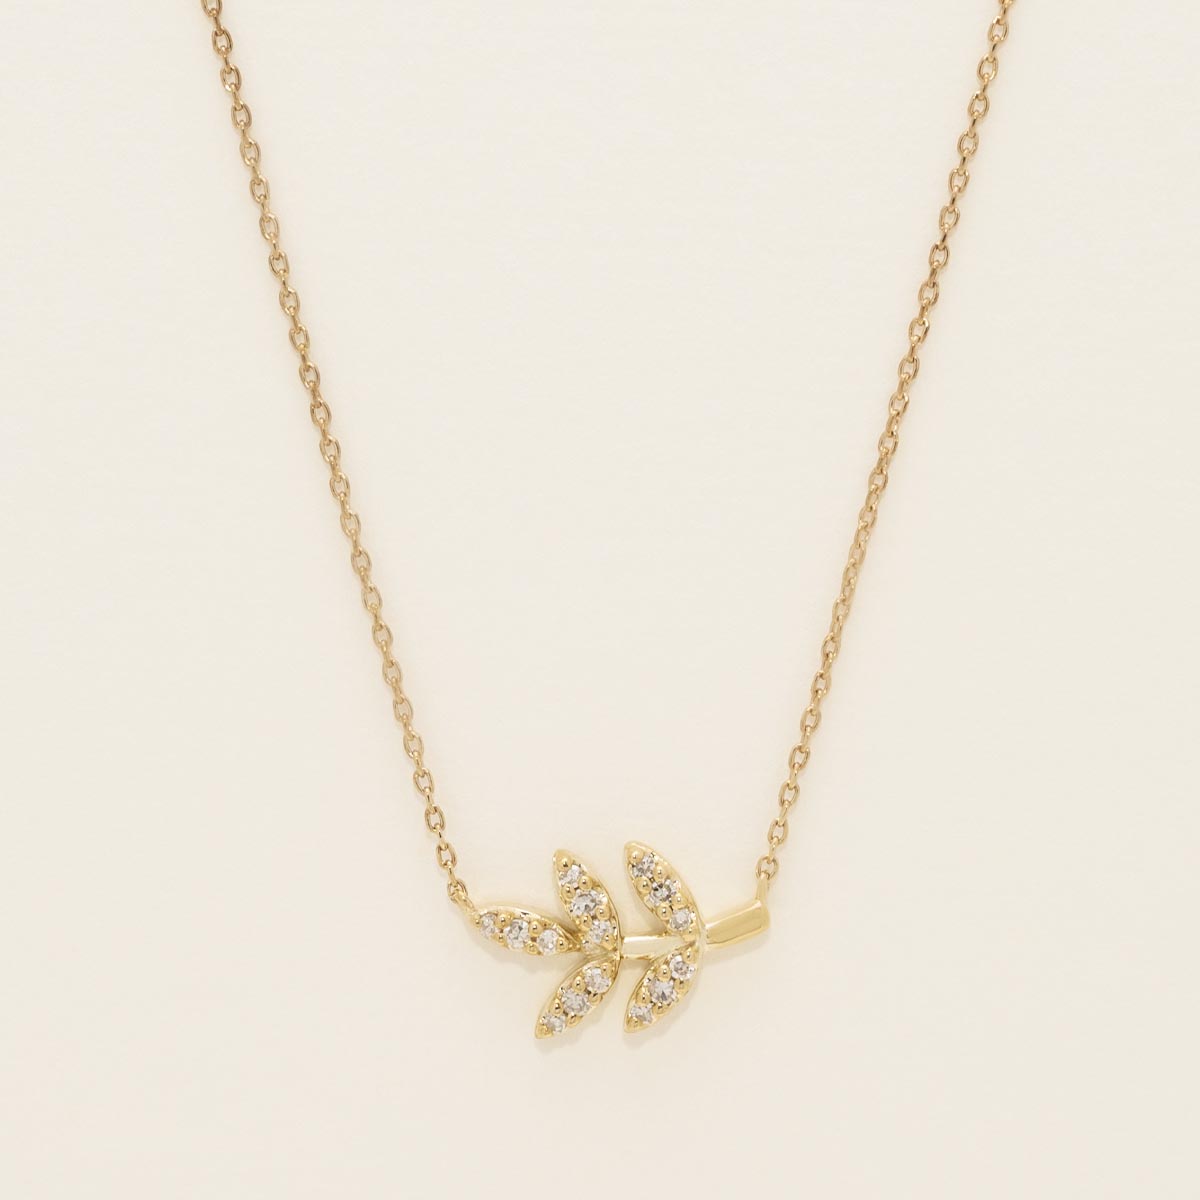 Diamond Petite Leaf Fashion Necklace in 10kt Yellow Gold (1/10ct tw)